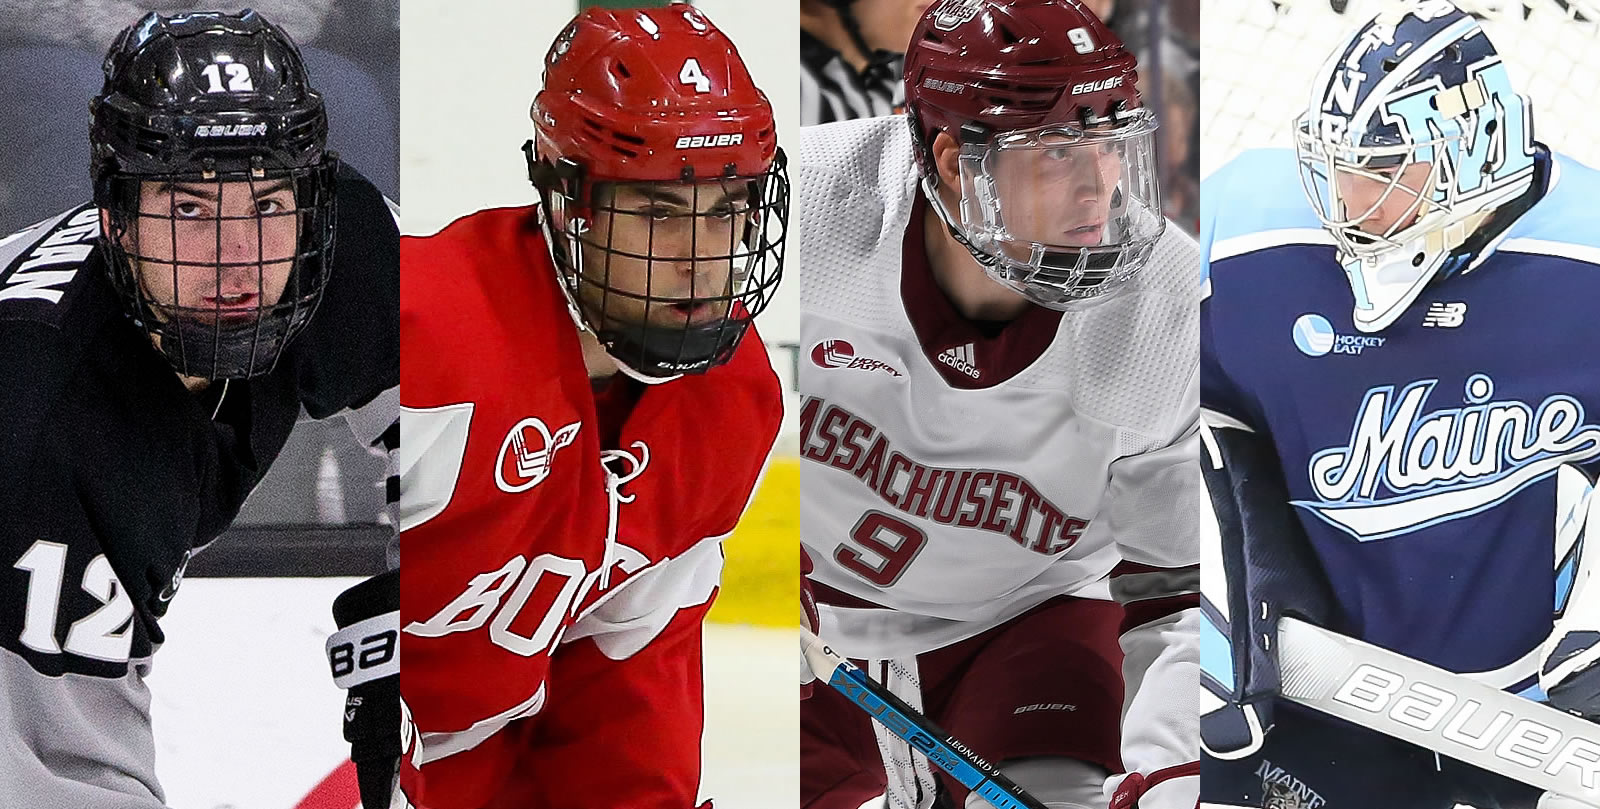 TWO WCHA PLAYERS SELECTED FOR CANADA'S WORLD JUNIOR TEAM - College